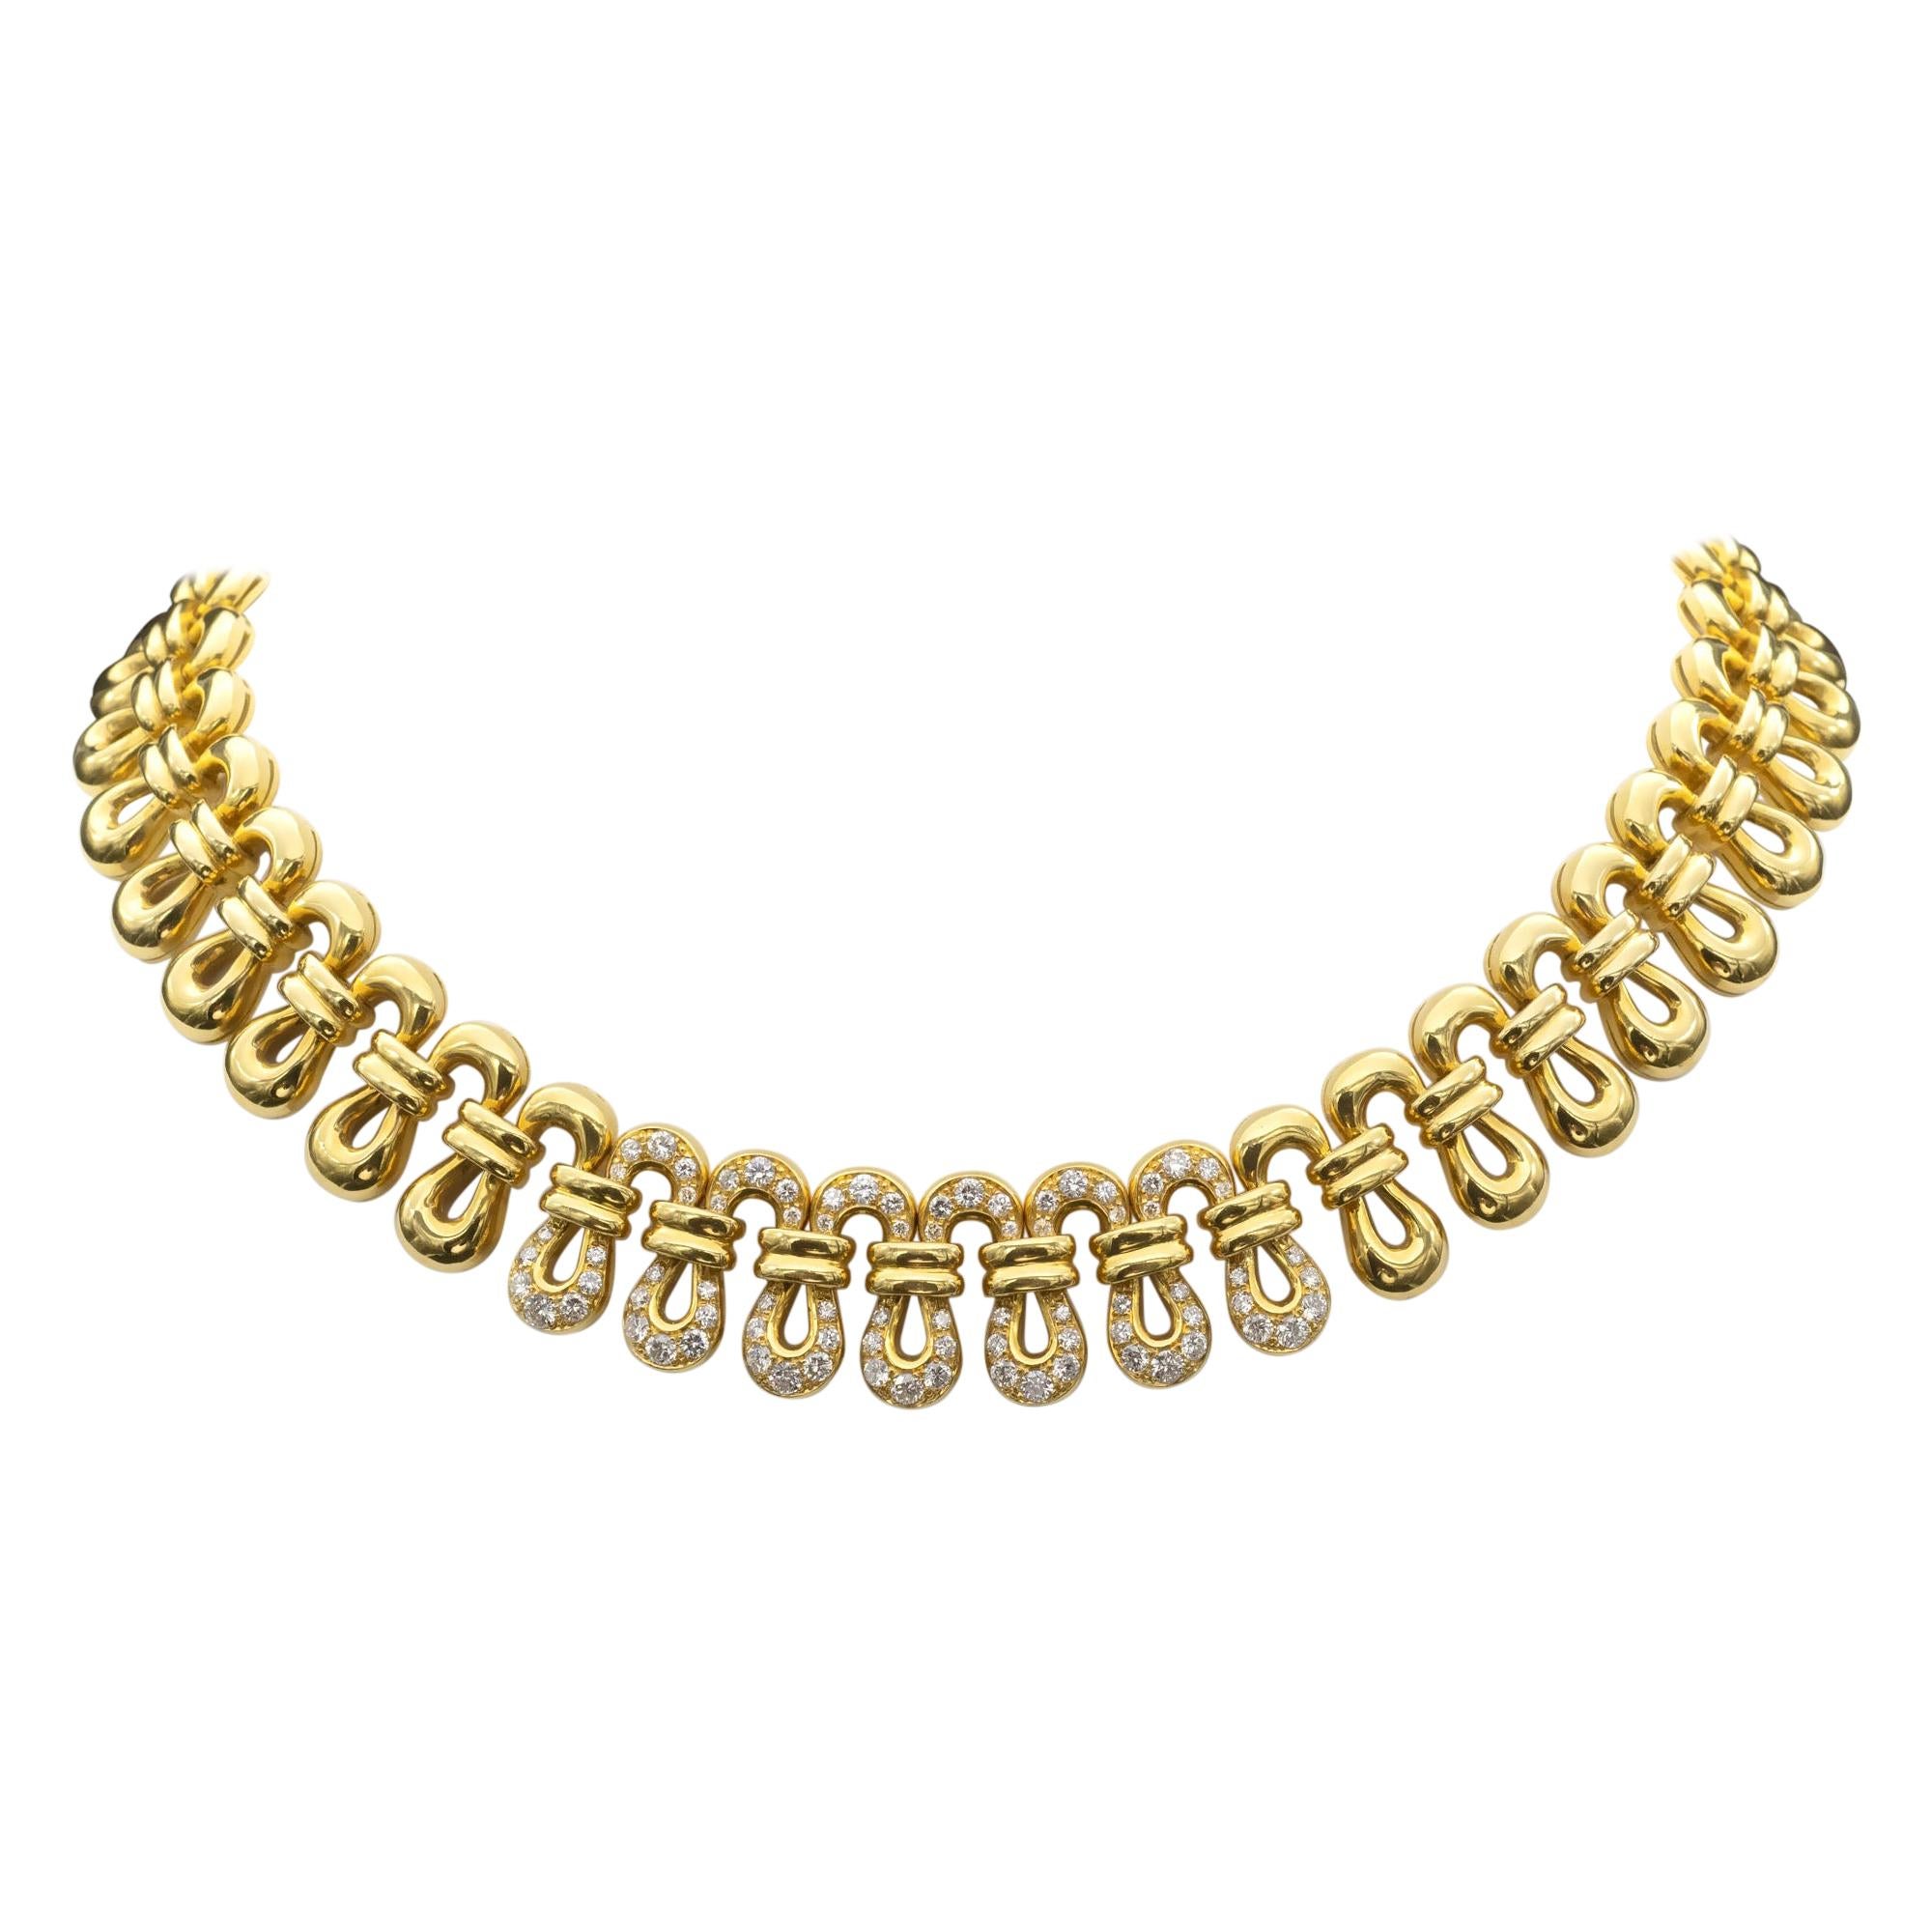 18 Karat Solid Gold and Diamond Necklace